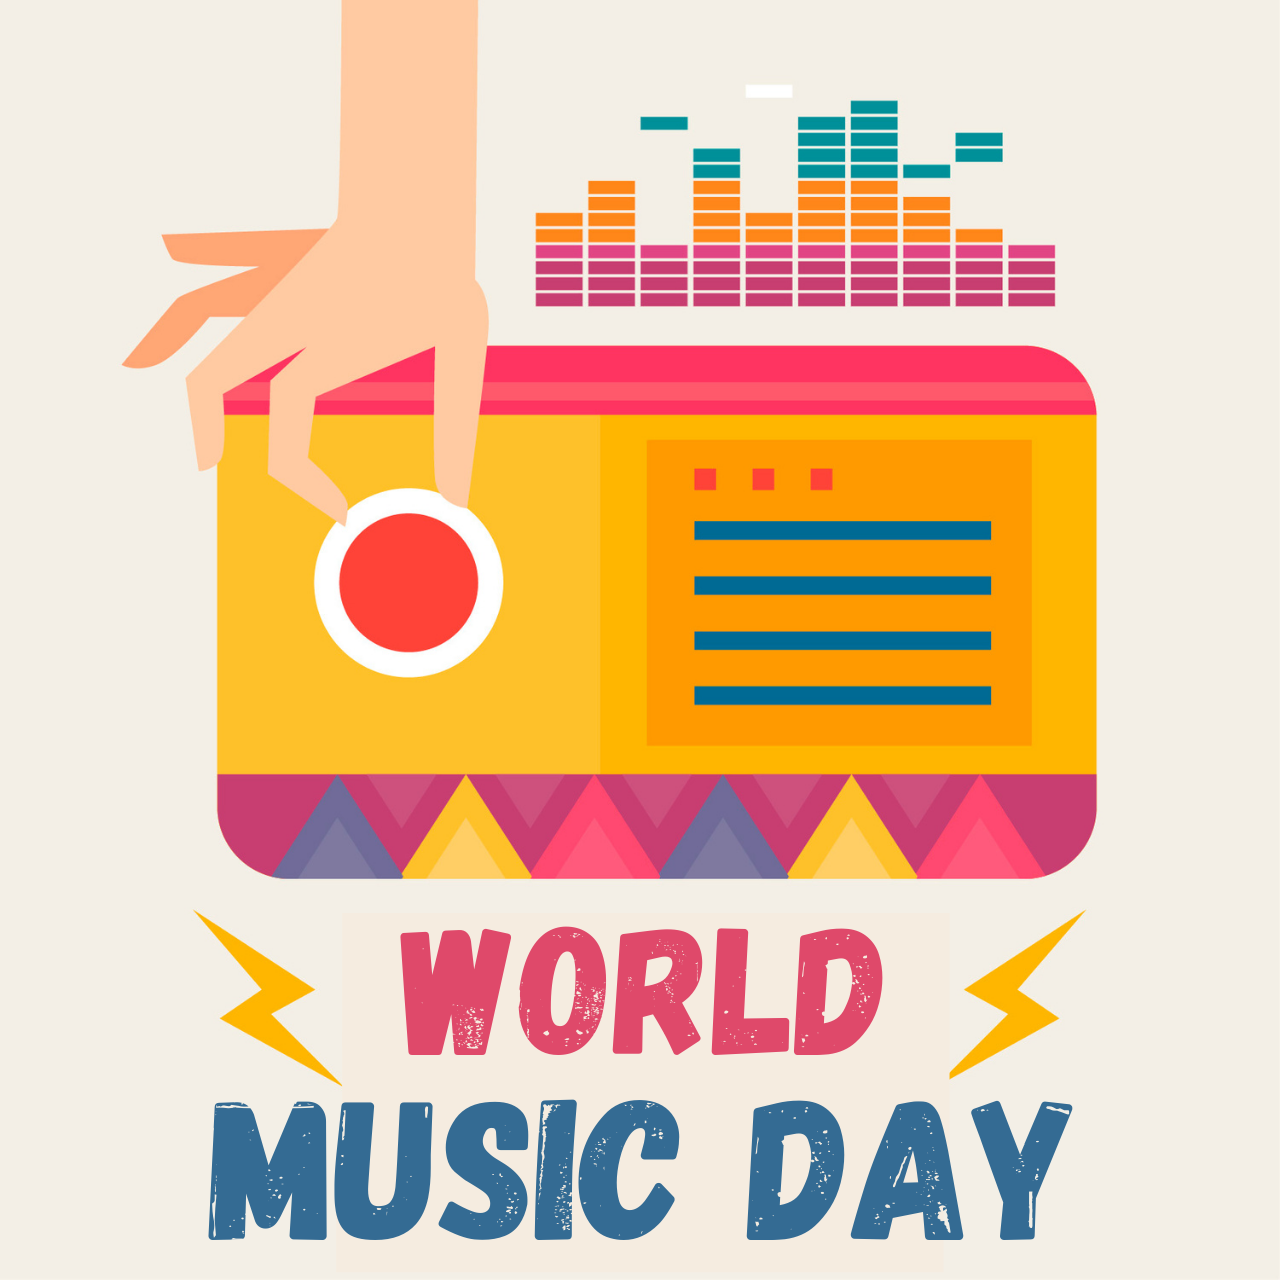 World Music Day 2021 Wishes & HD Images: WhatsApp Stickers, GIF Greetings, Facebook Messages & SMS to Celebrate Fête de la Musique